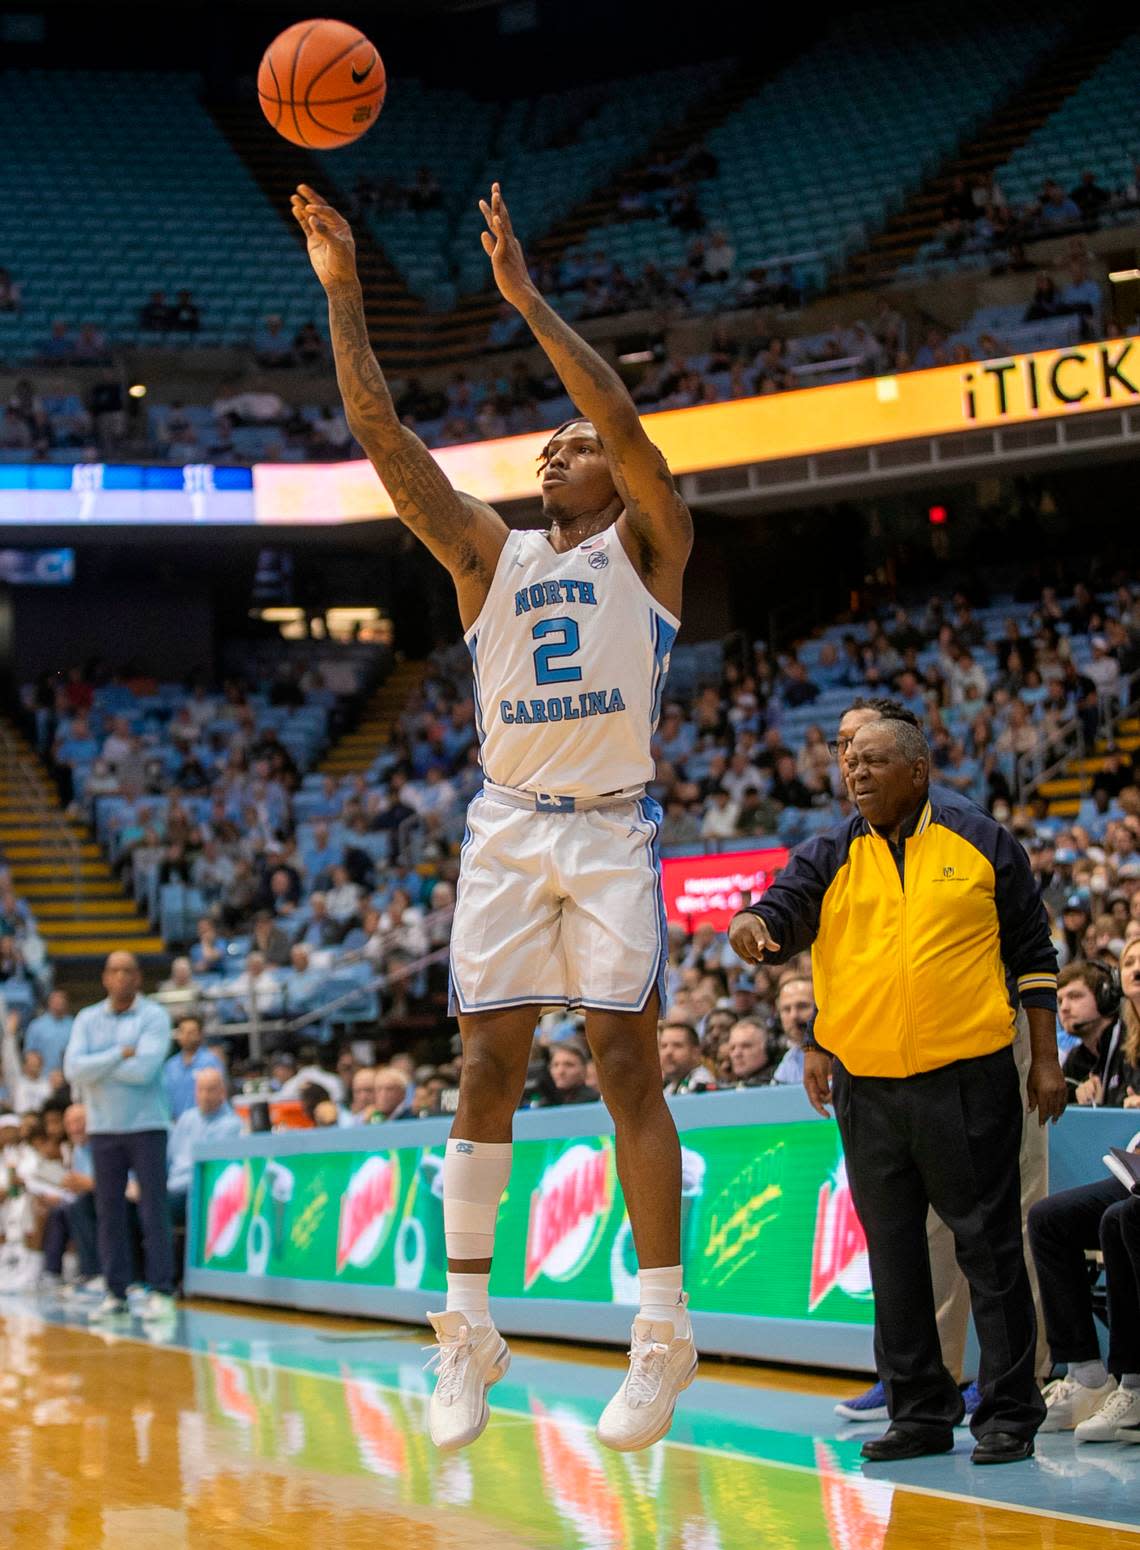 North Carolina’s Caleb Love (2) launches a three-point attempt in front of the Johnson C. Smith bench during an exhibition game on Friday, October 28, 2022 at the Smith Center in Chapel Hill, N.C. Love lead all scores with 20 points.